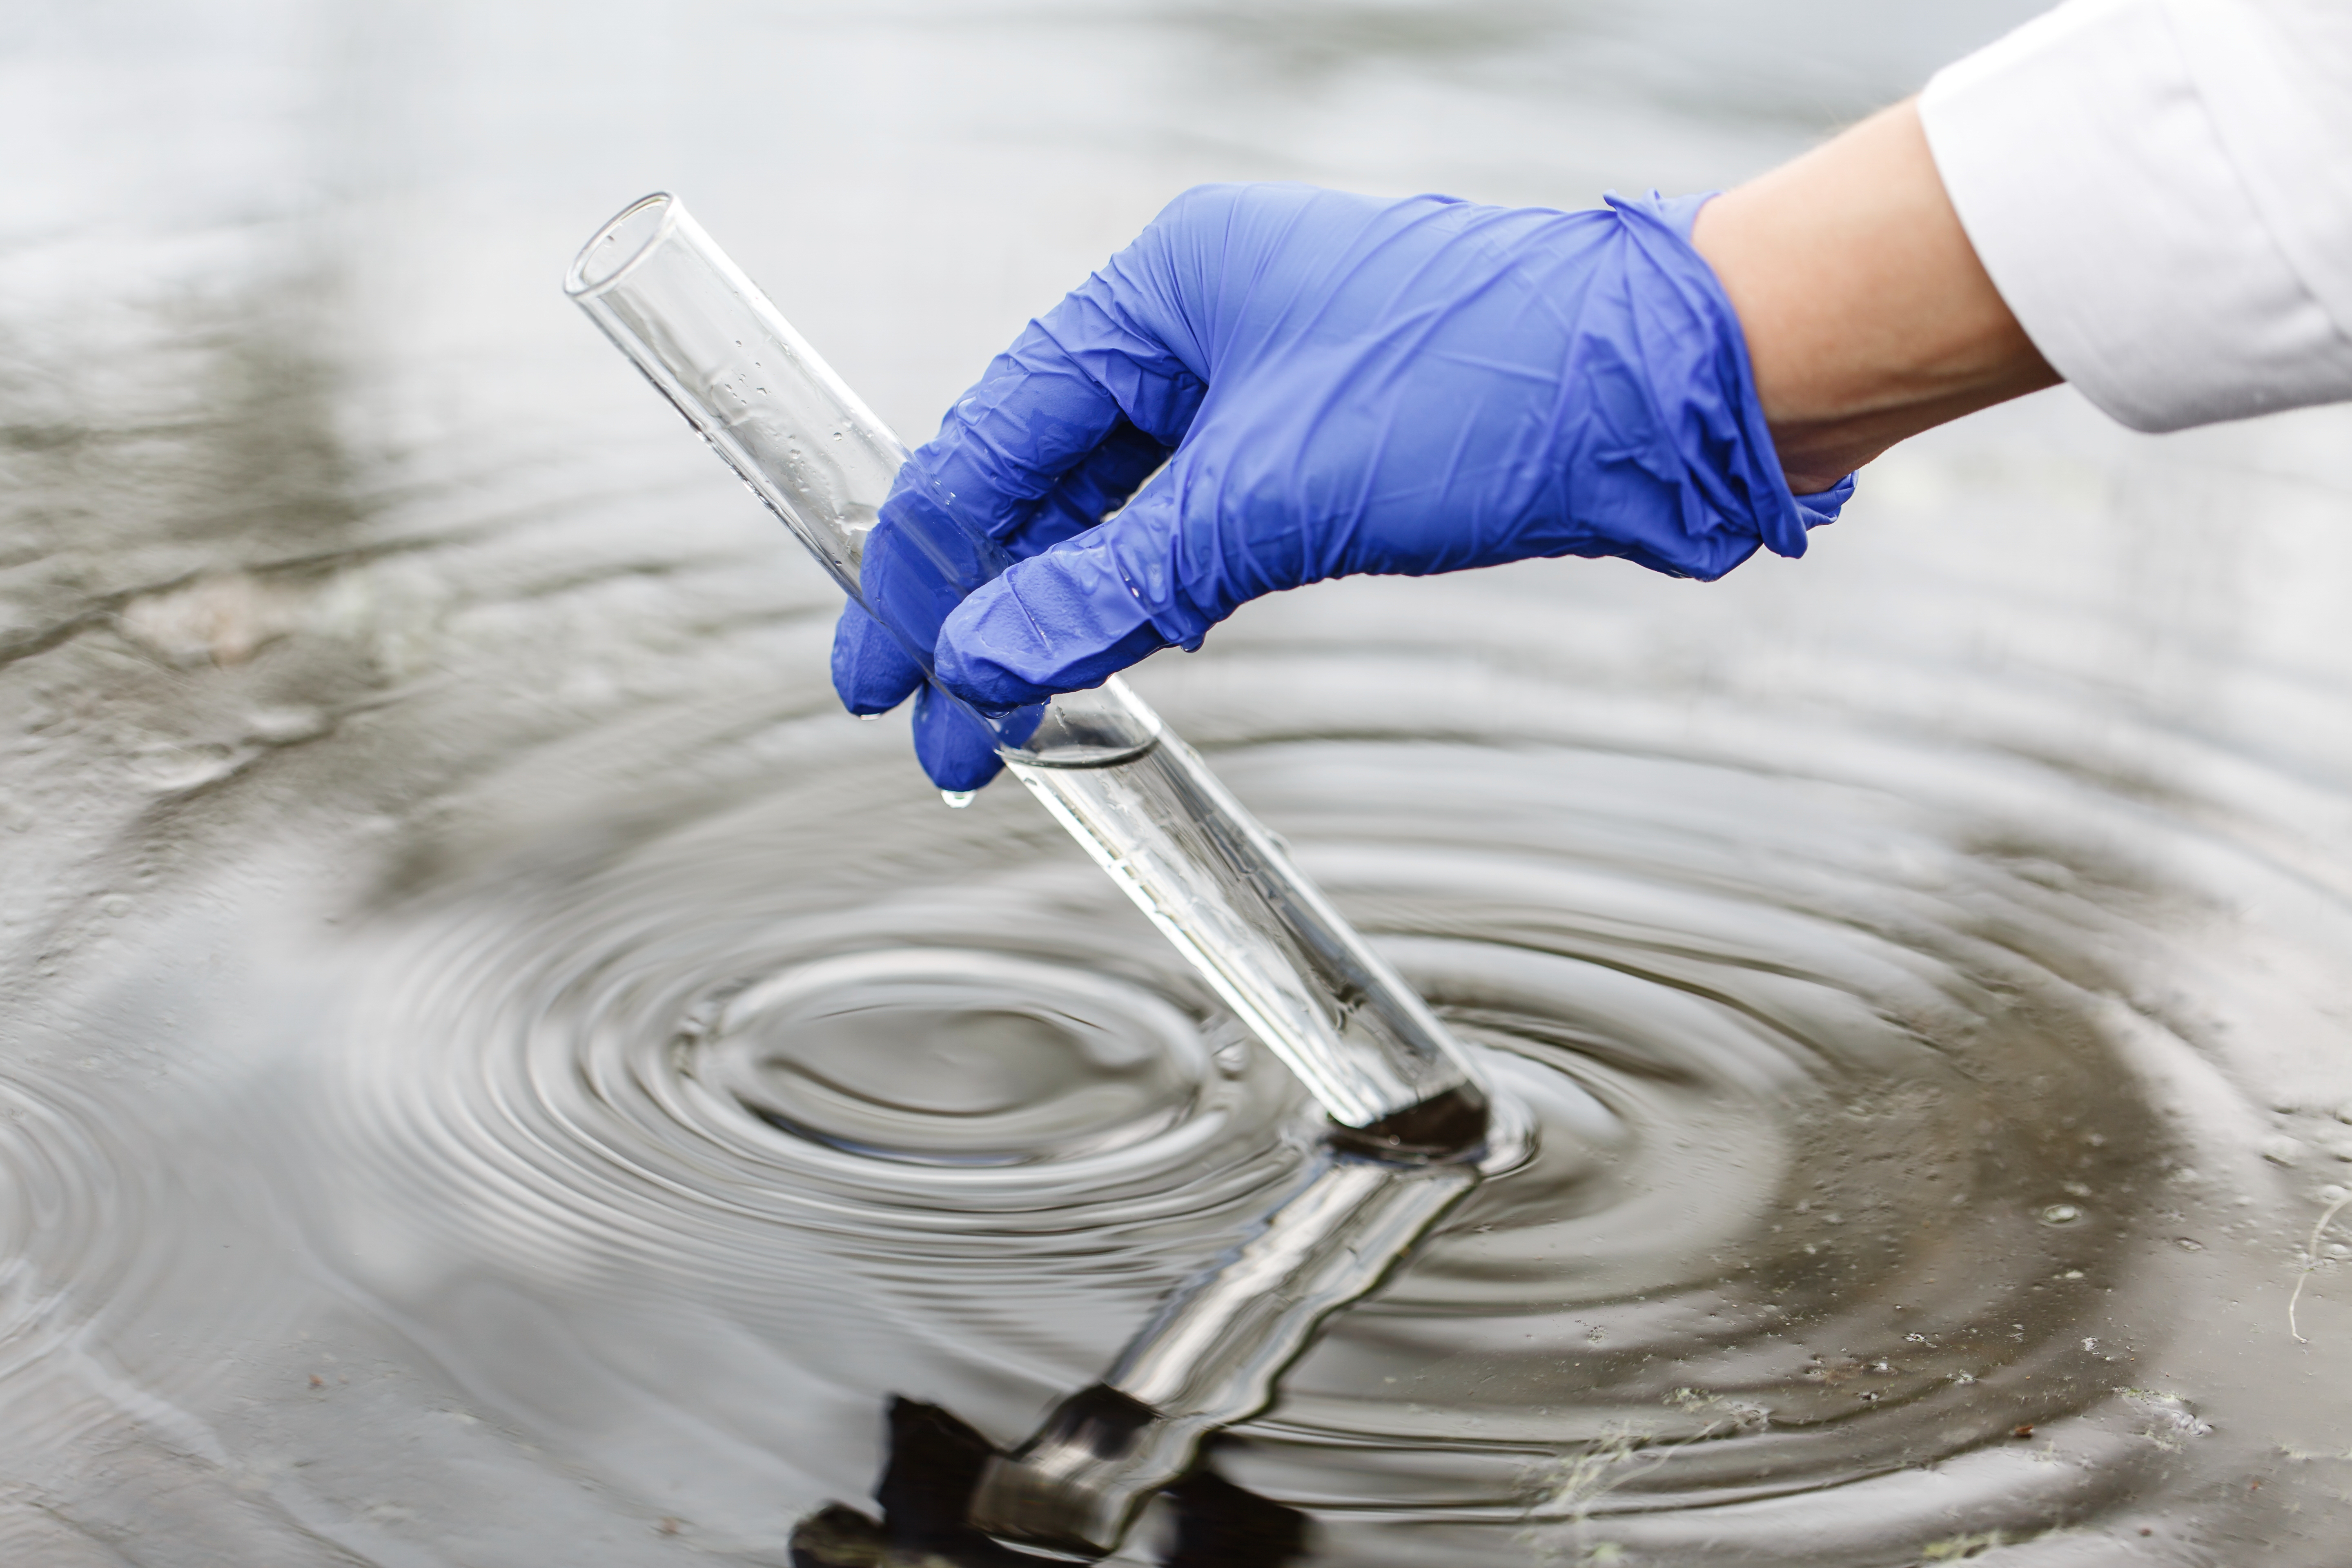 researcher-holds-test-tube-with-water-hand-blue-glove